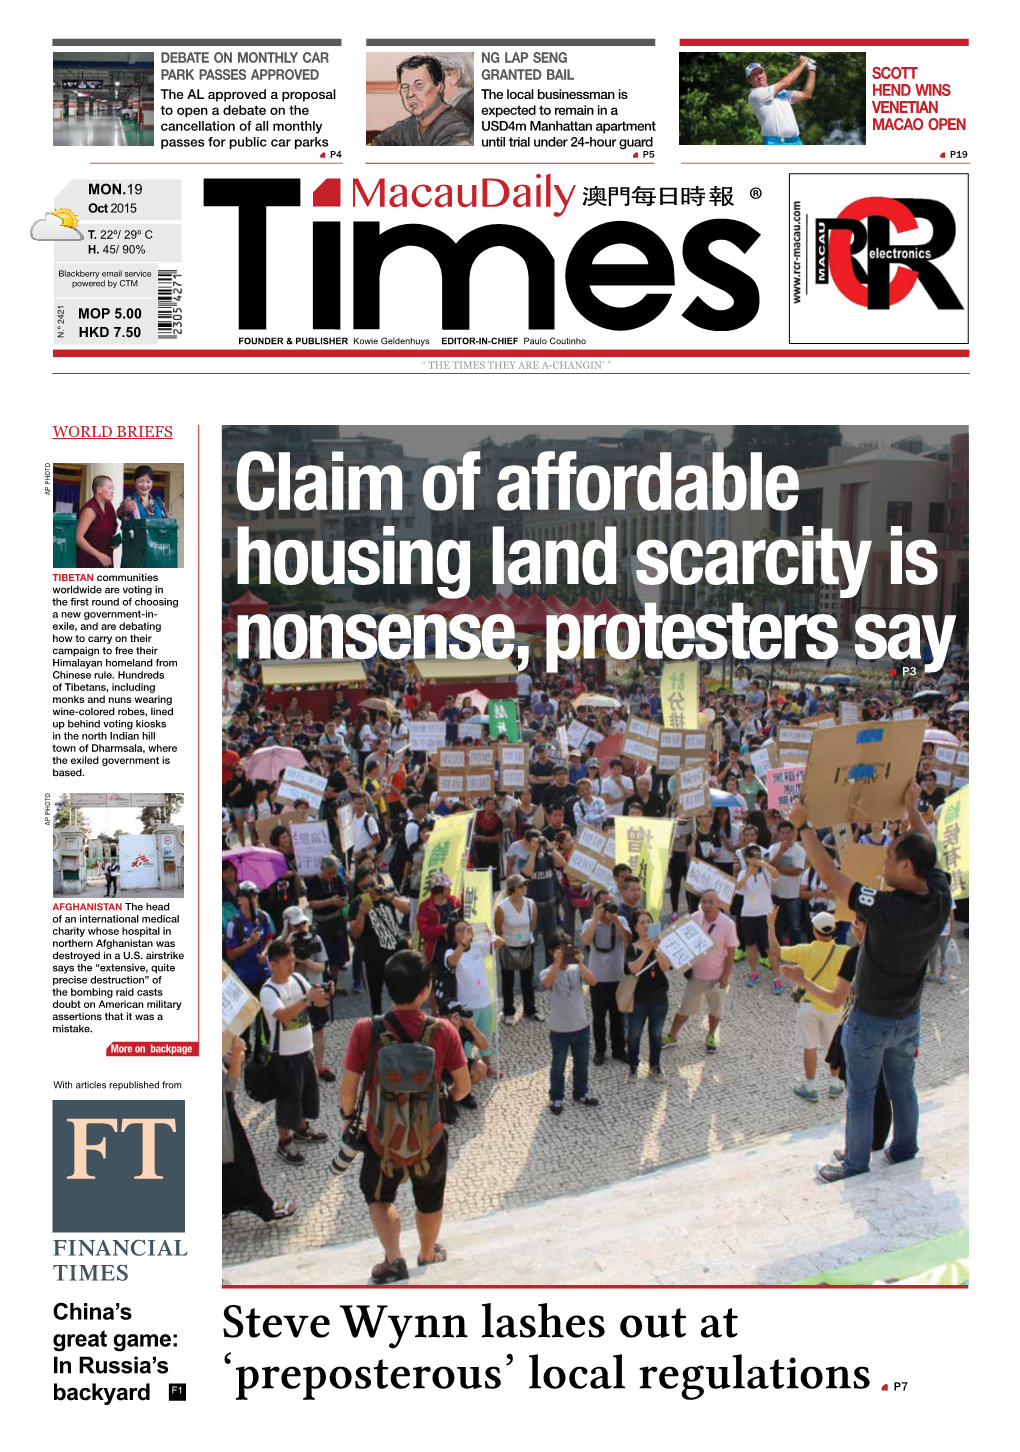 Claim of Affordable Housing Land Scarcity Is Nonsense, Protesters Say